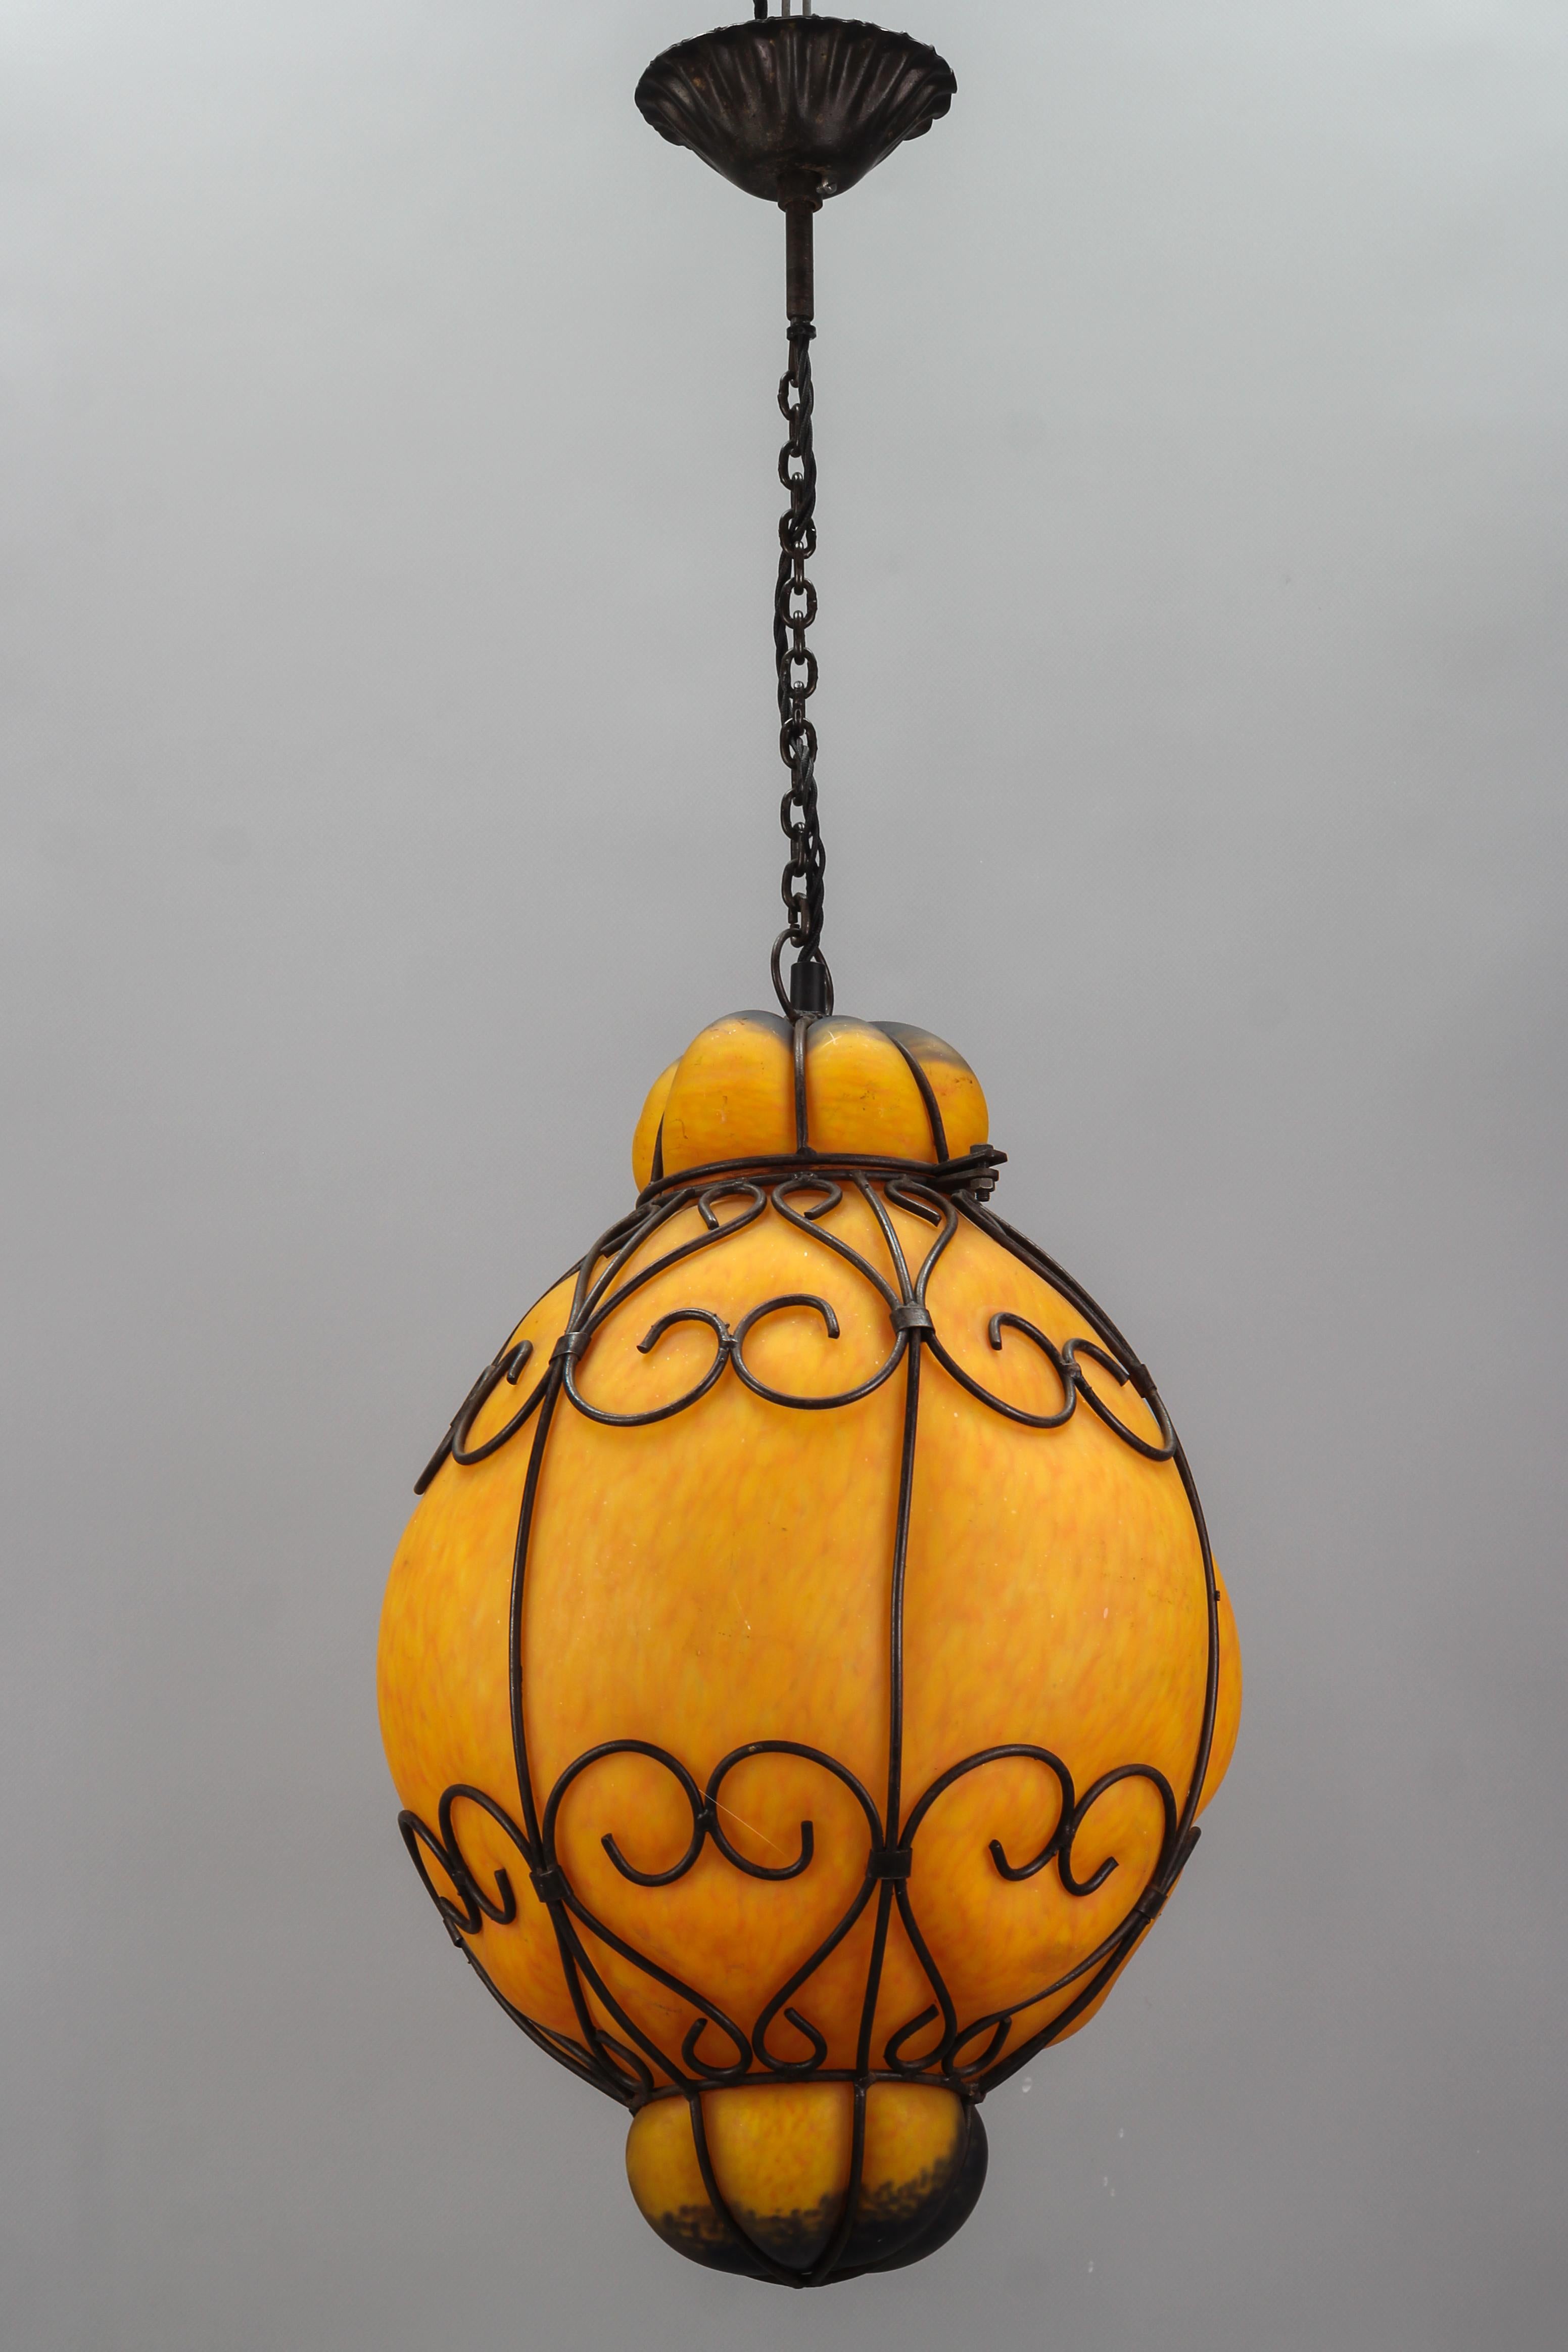 Venetian Style Pâte de Verre glass metal caged lantern pendant light, France, 1970s.
Impressive and large hand-blown Pâte de Verre glass lantern in orange and dark blue tones formed within a decorative metal cage. The different shapes of the glass